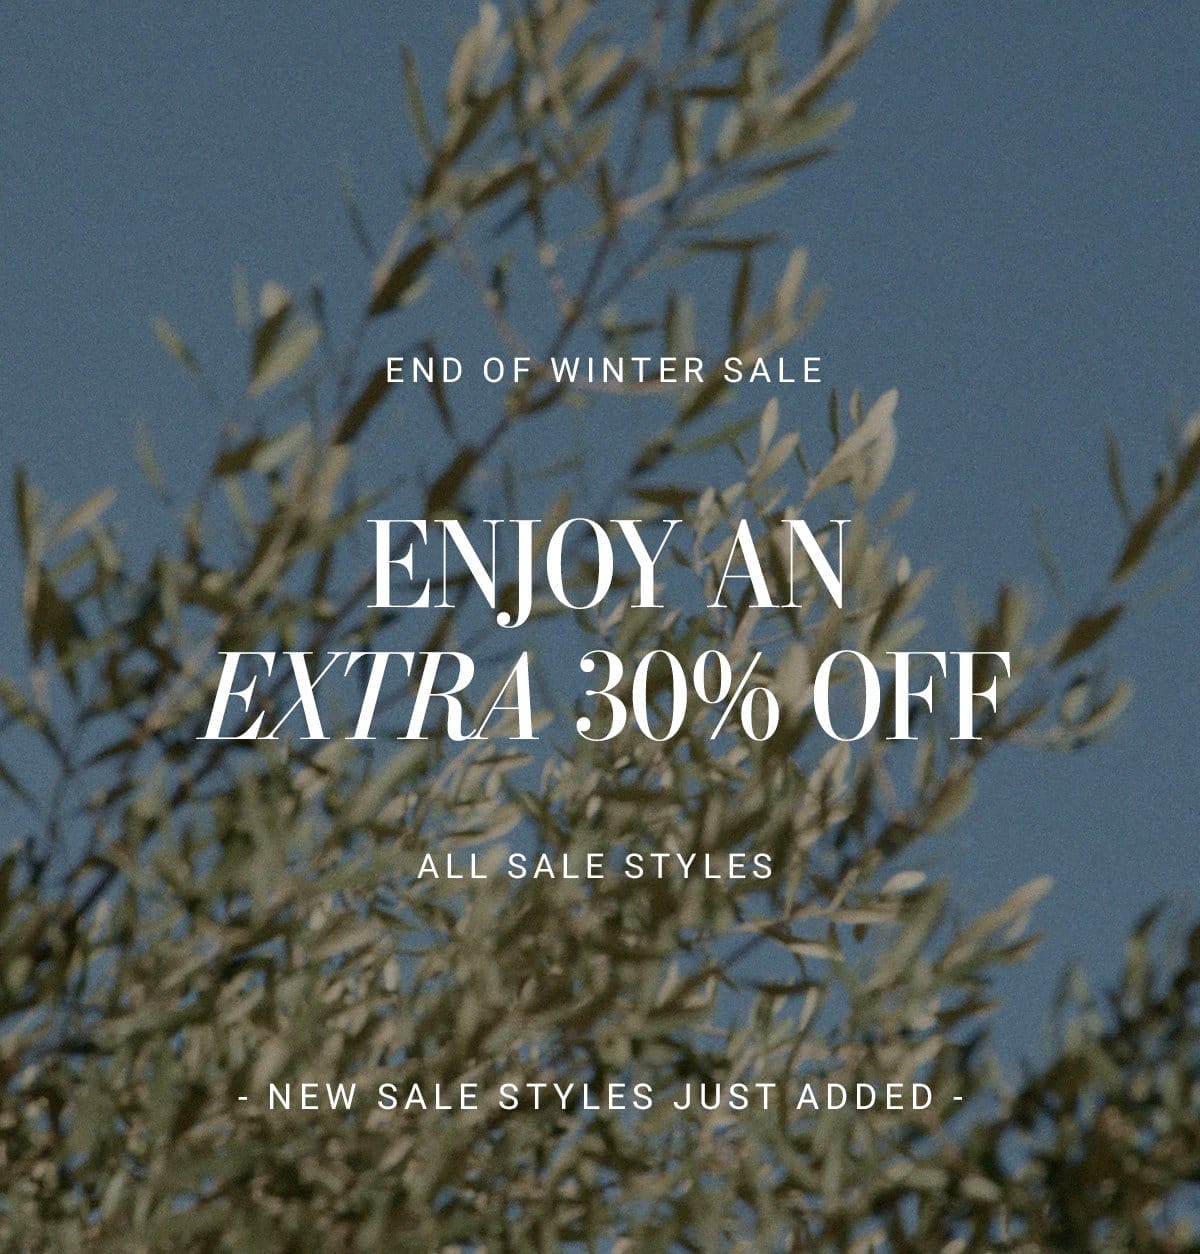 END OF WINTER SALE. ENJOY AN EXTRA 30% OFF ALL SALE STYLES